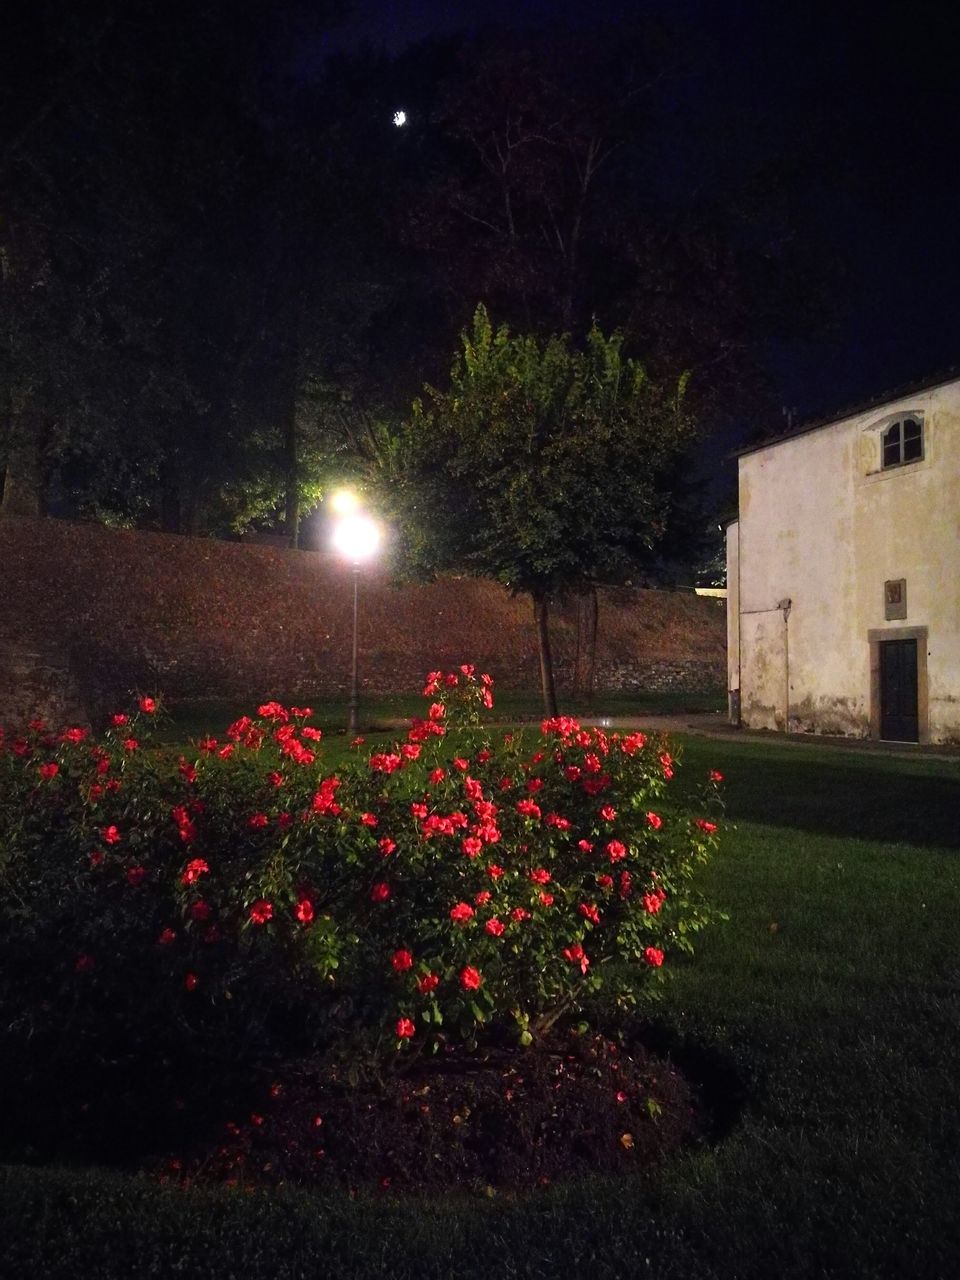 flower, night, building exterior, architecture, built structure, tree, growth, plant, illuminated, in bloom, fragility, red, outdoors, nature, blossom, freshness, sky, beauty in nature, pink color, no people, springtime, blooming, petal